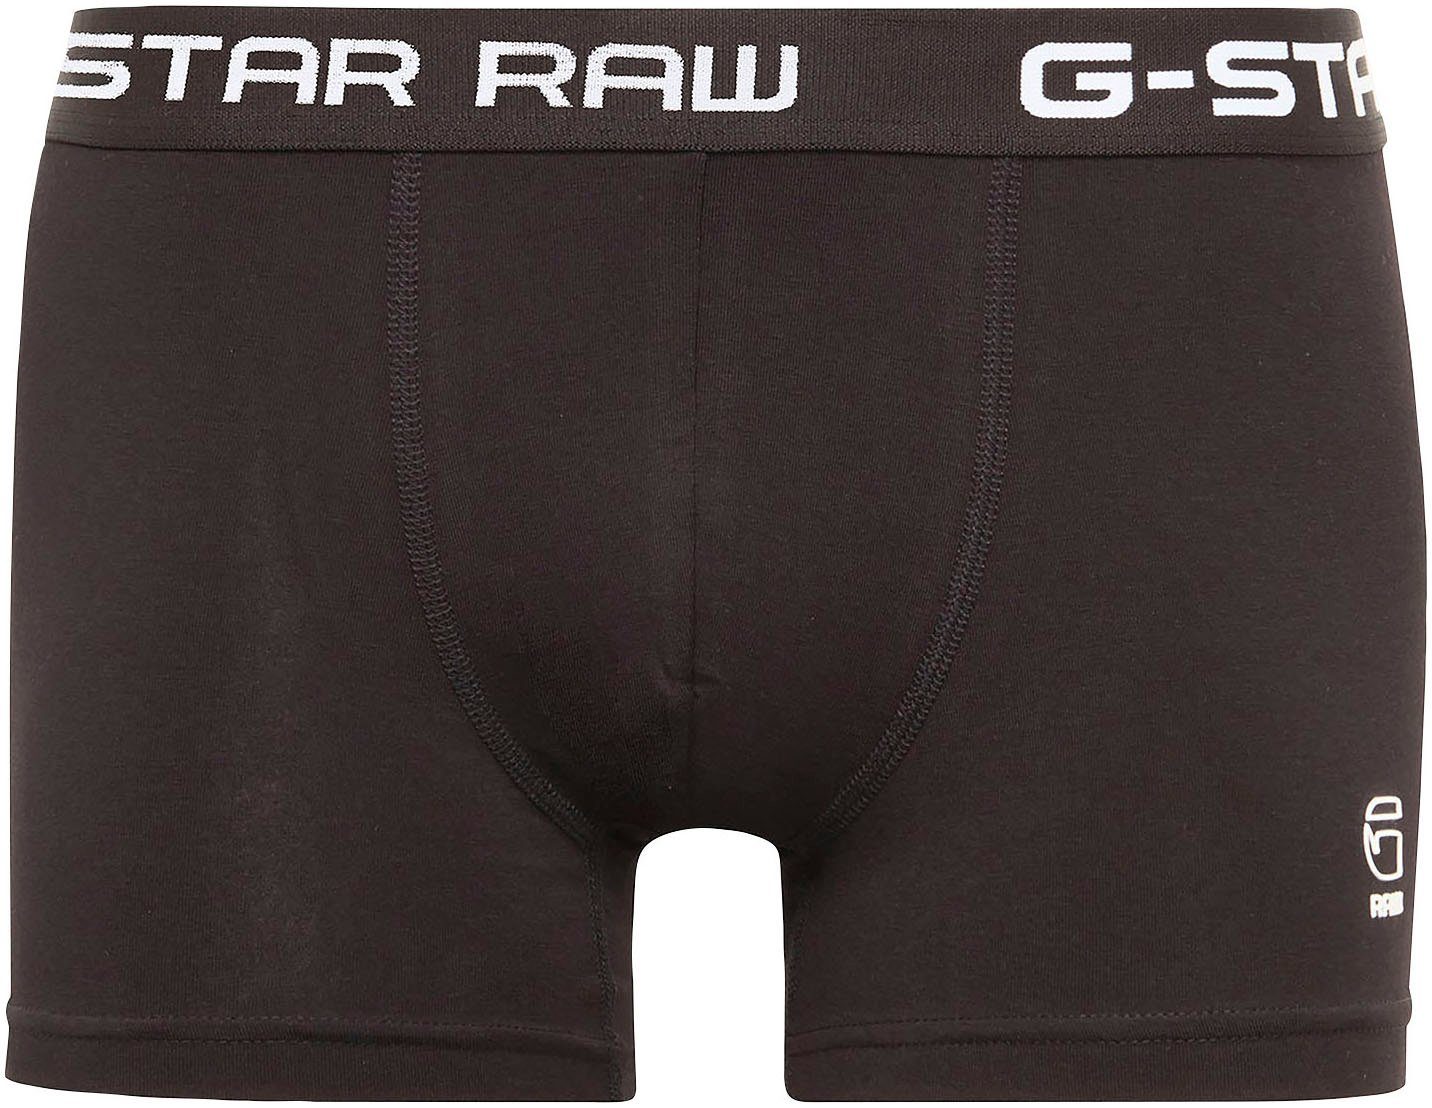 G-Star RAW Boxer Classic trunk (Packung, pack 3 schwarz 3er-Pack) 3-St